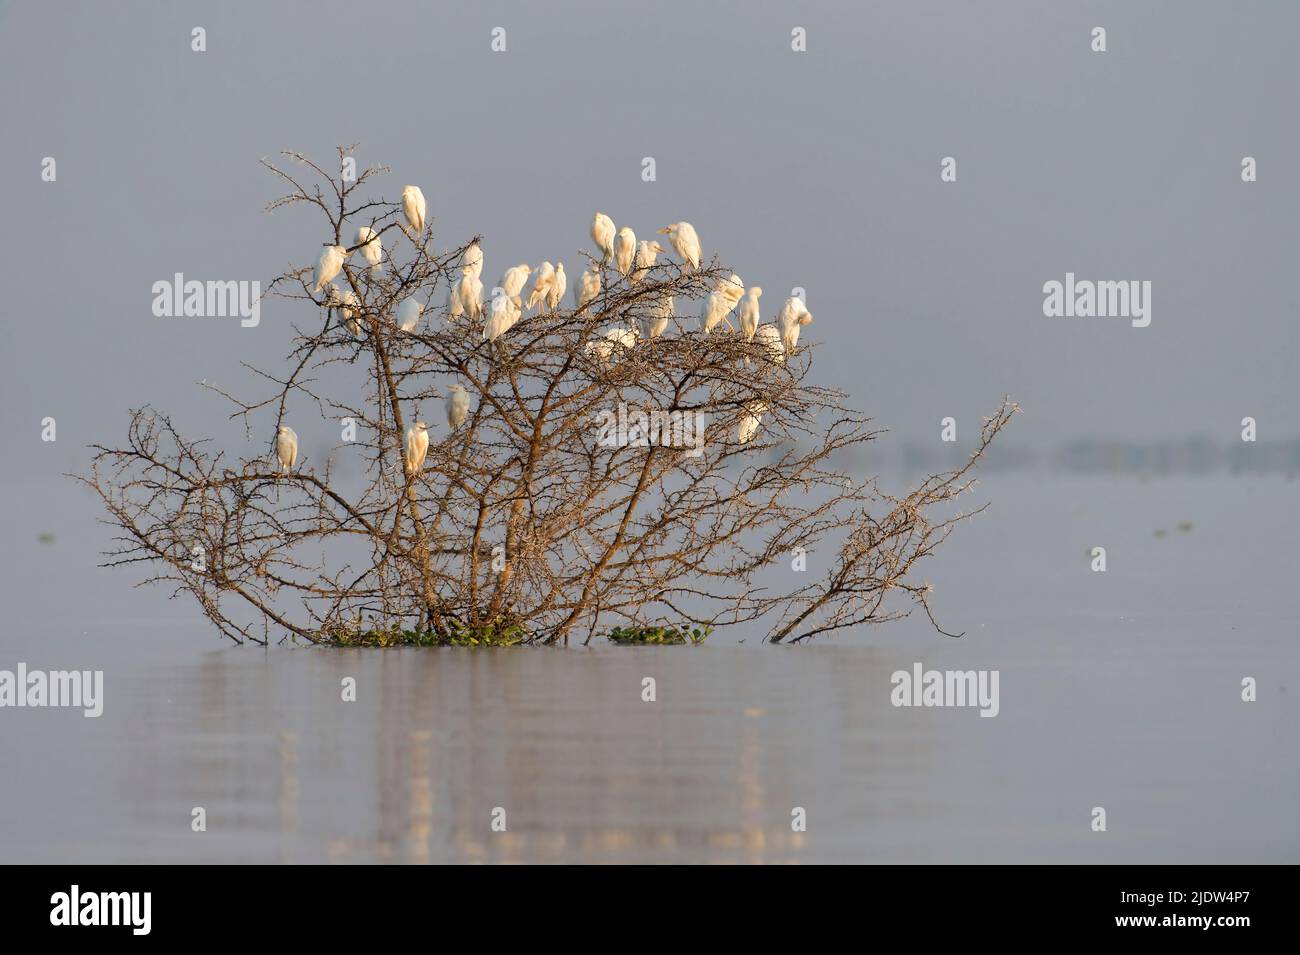 Colony of Cattle Egrets (Bulbulcus ibis) resting in a submerged acasia tree in Lake Naivasha, Kenya. Stock Photo